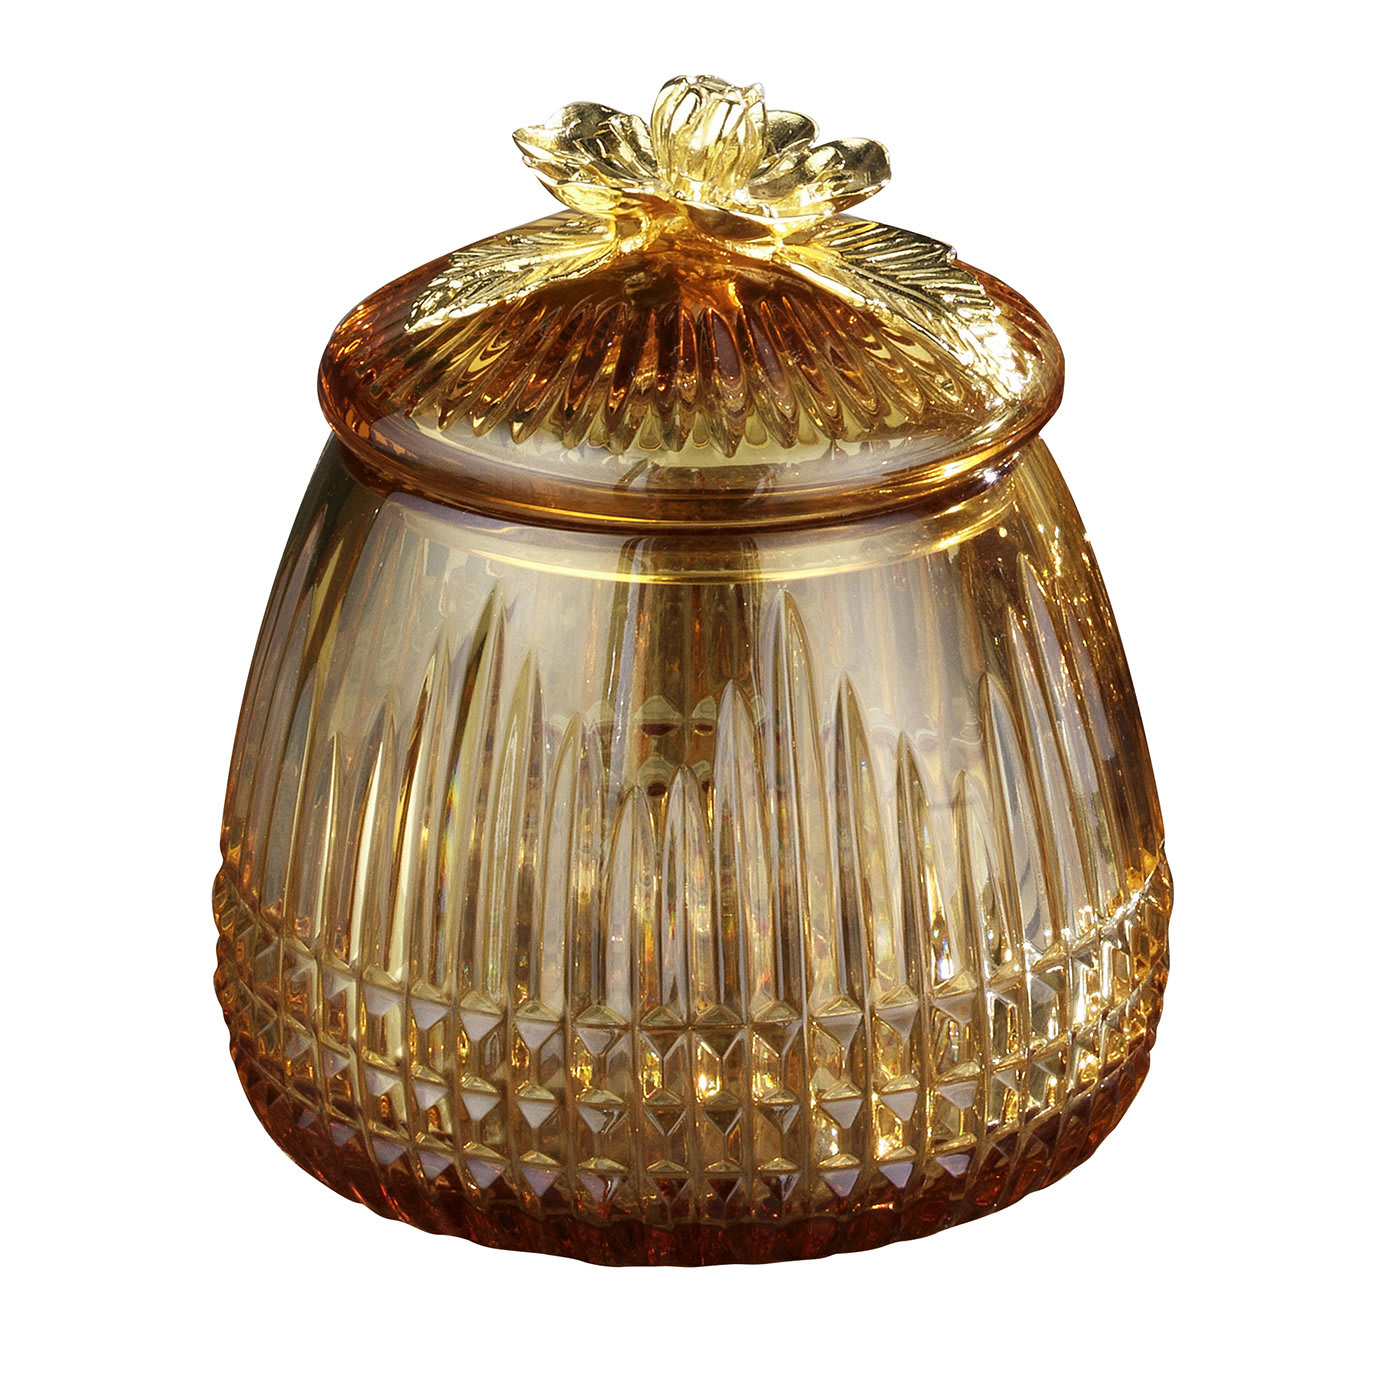 Gold and Amber Crystal Globe Box with Lid #2 - L'Originale